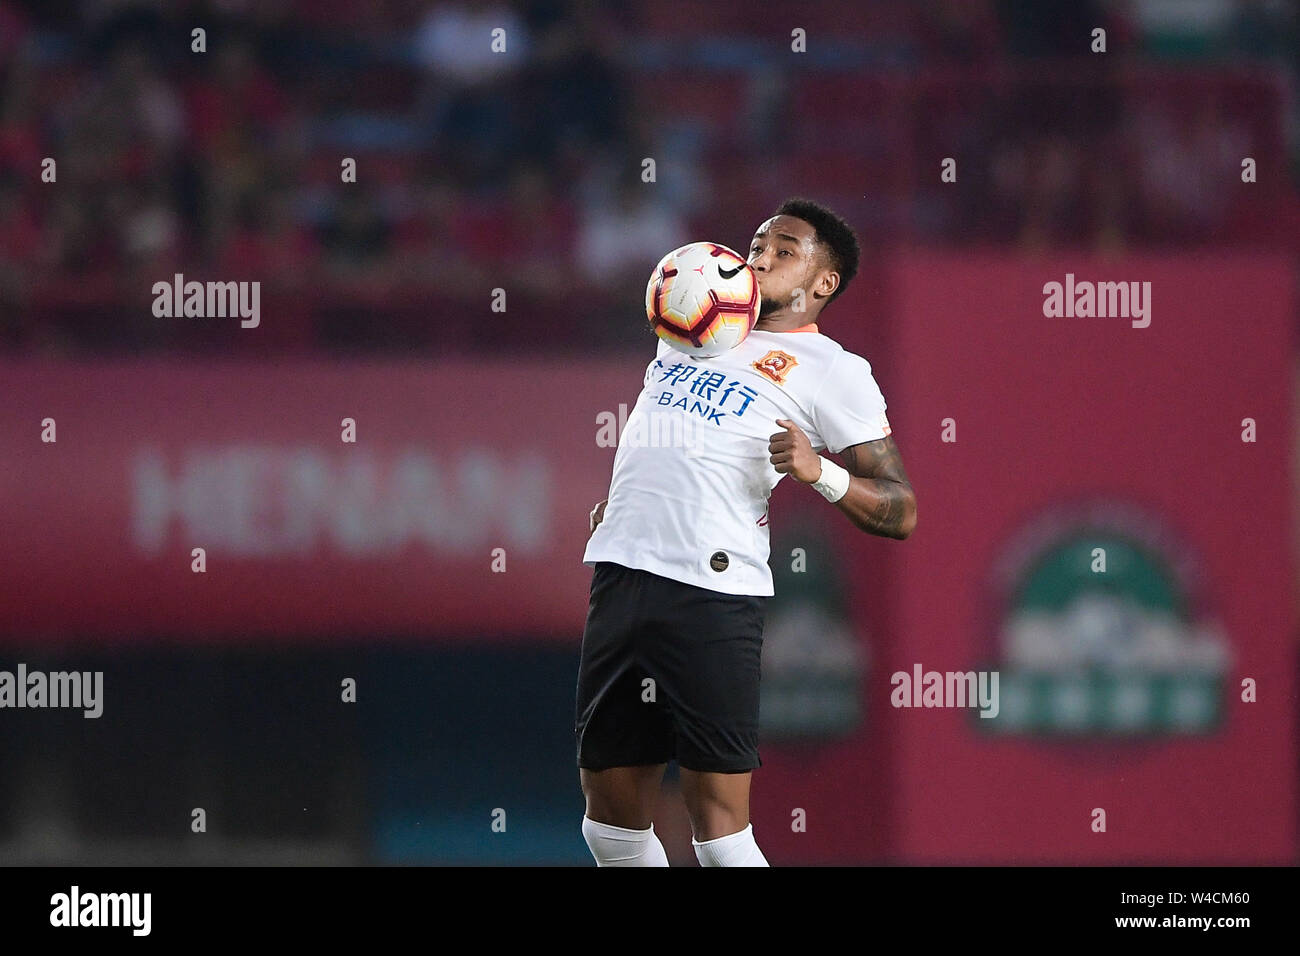 Brazilian football player Rafael Pereira da Silva, commonly known as Rafael or Rafael da Silva, of Wuhan Zall F.C. stops the ball with his chest during the 19th round of Chinese Football Association Super League (CSL) against Henan Jianye in Zhengzhou, central China’s Henan province on 21 July 2019.  The match ened with a draw 0-0. Stock Photo